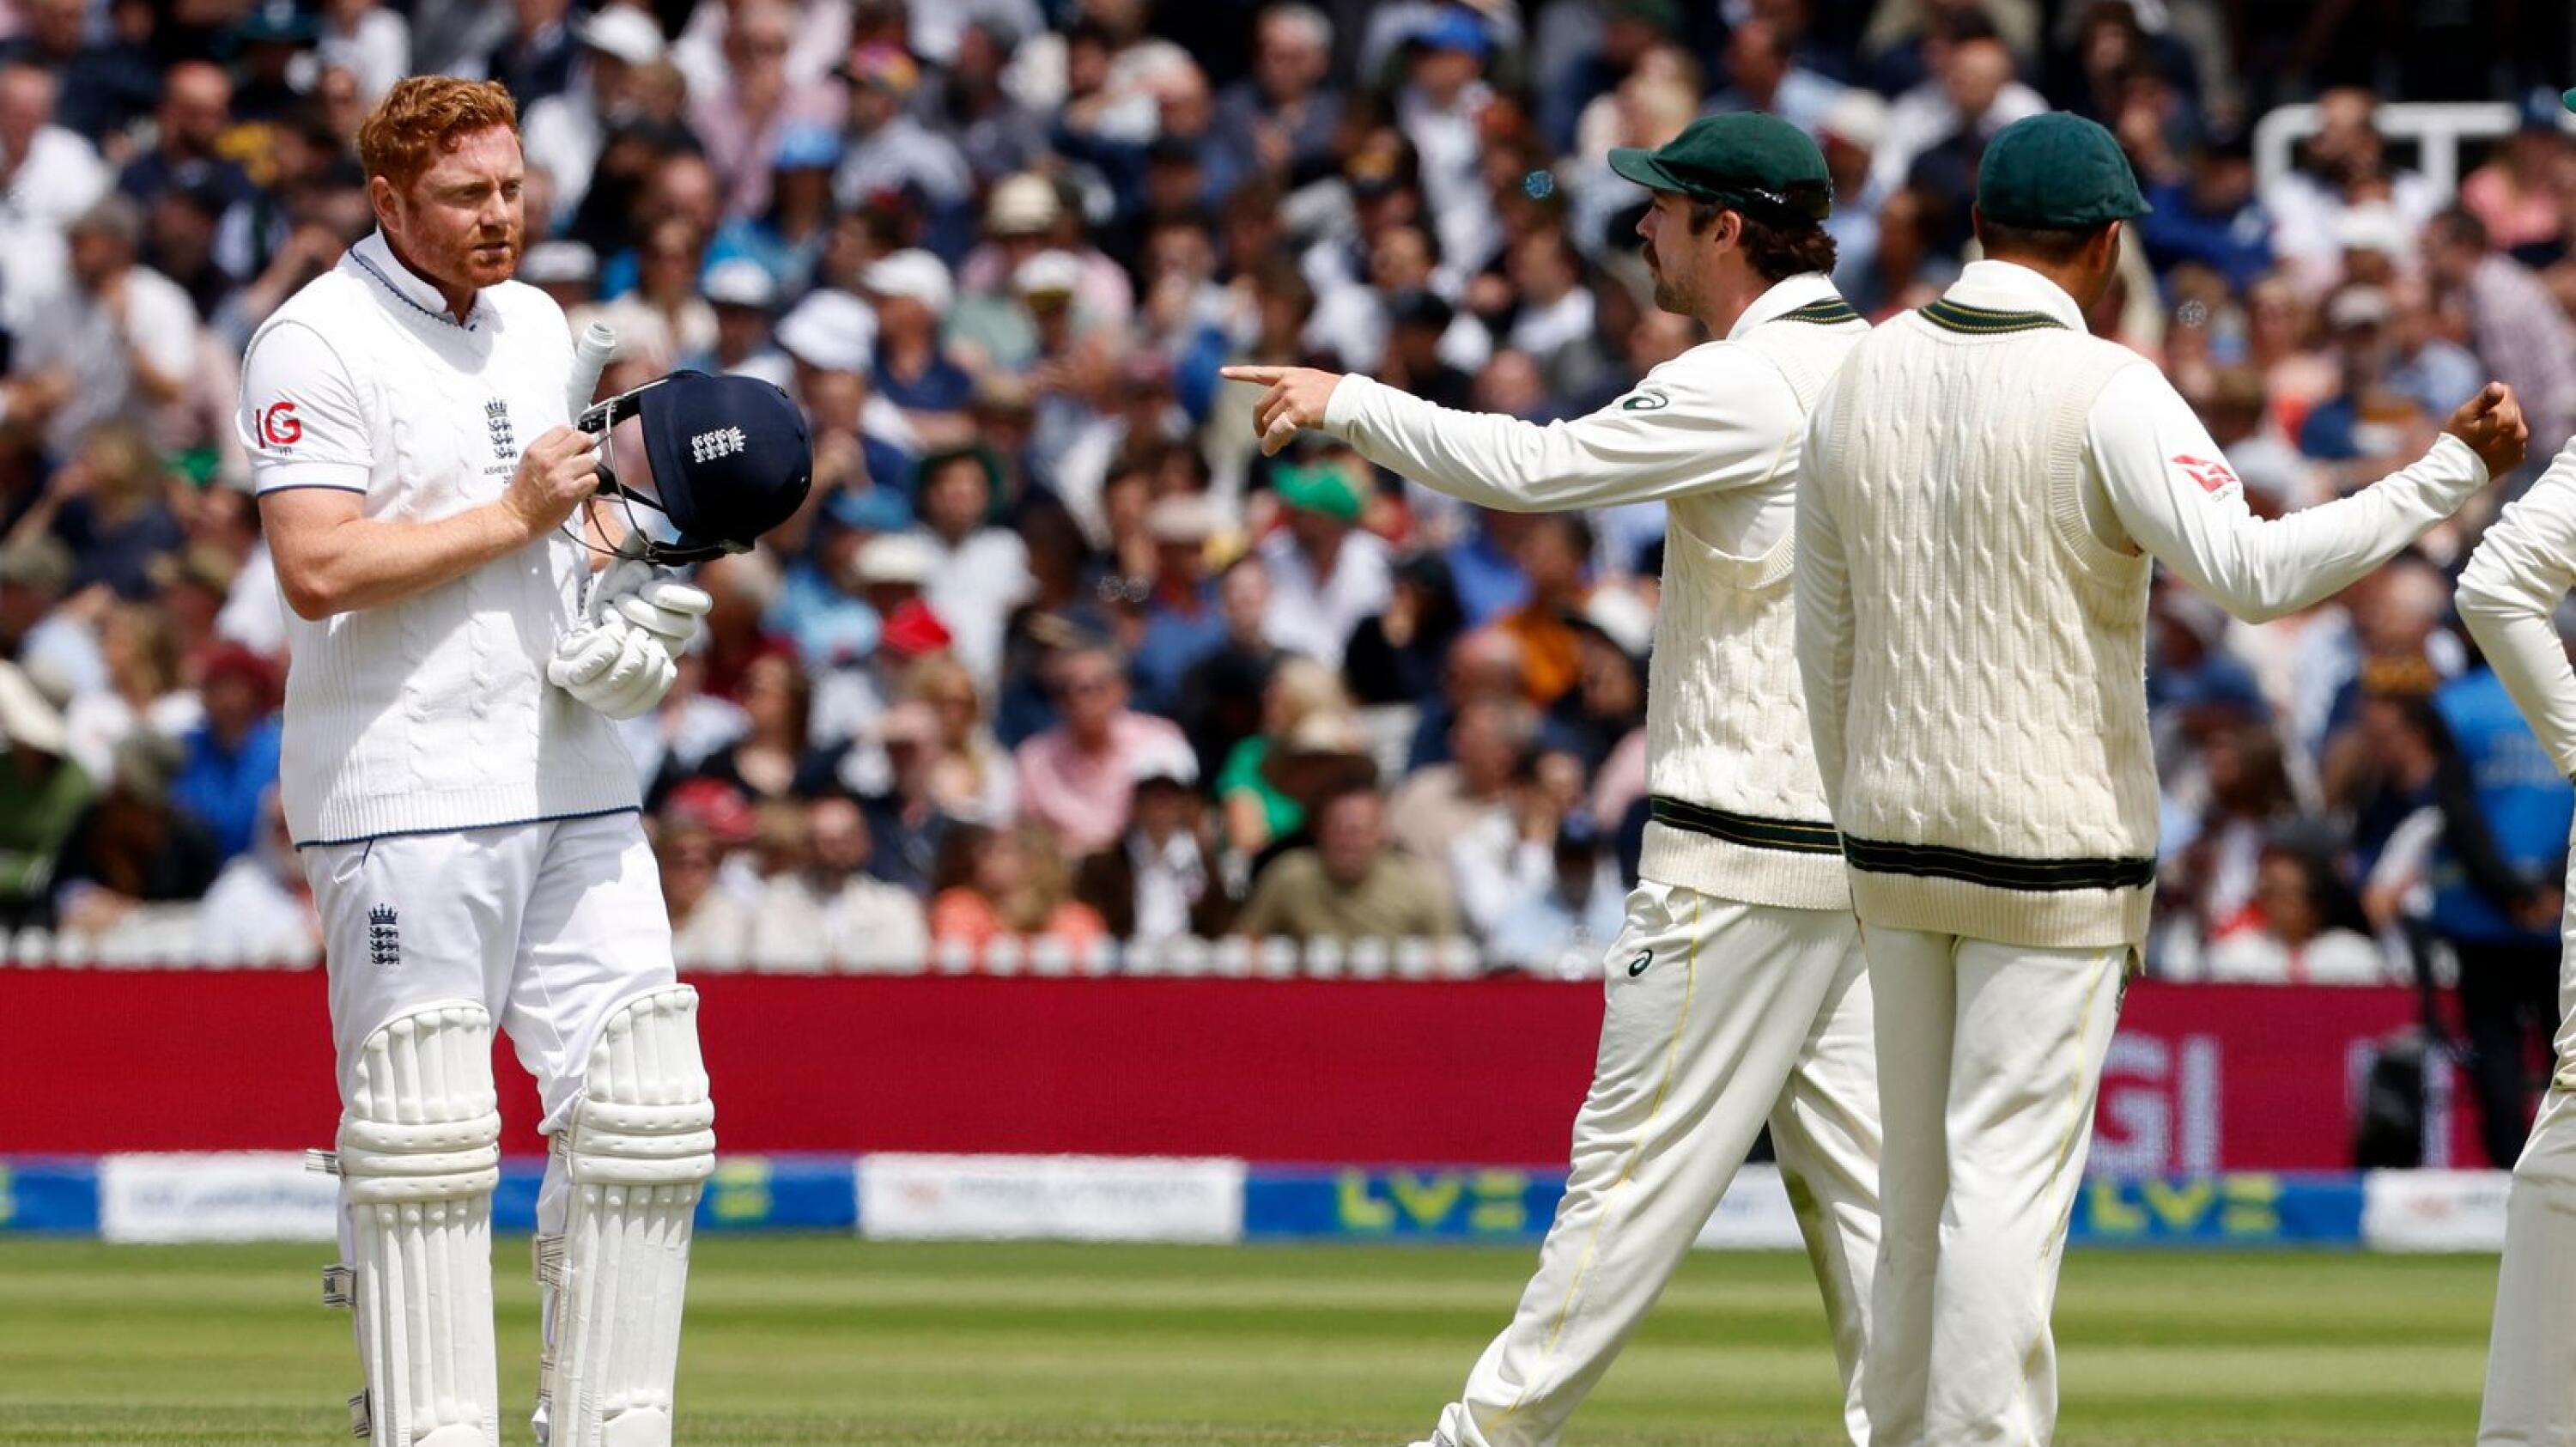 Australia's Travis Head (C) points as he talks with England's Jonny Bairstow whilst the await the successfully appeal for Bairstow's wicket for 10 runs on day five of the second Ashes cricket Test match between England and Australia at Lord's cricket ground